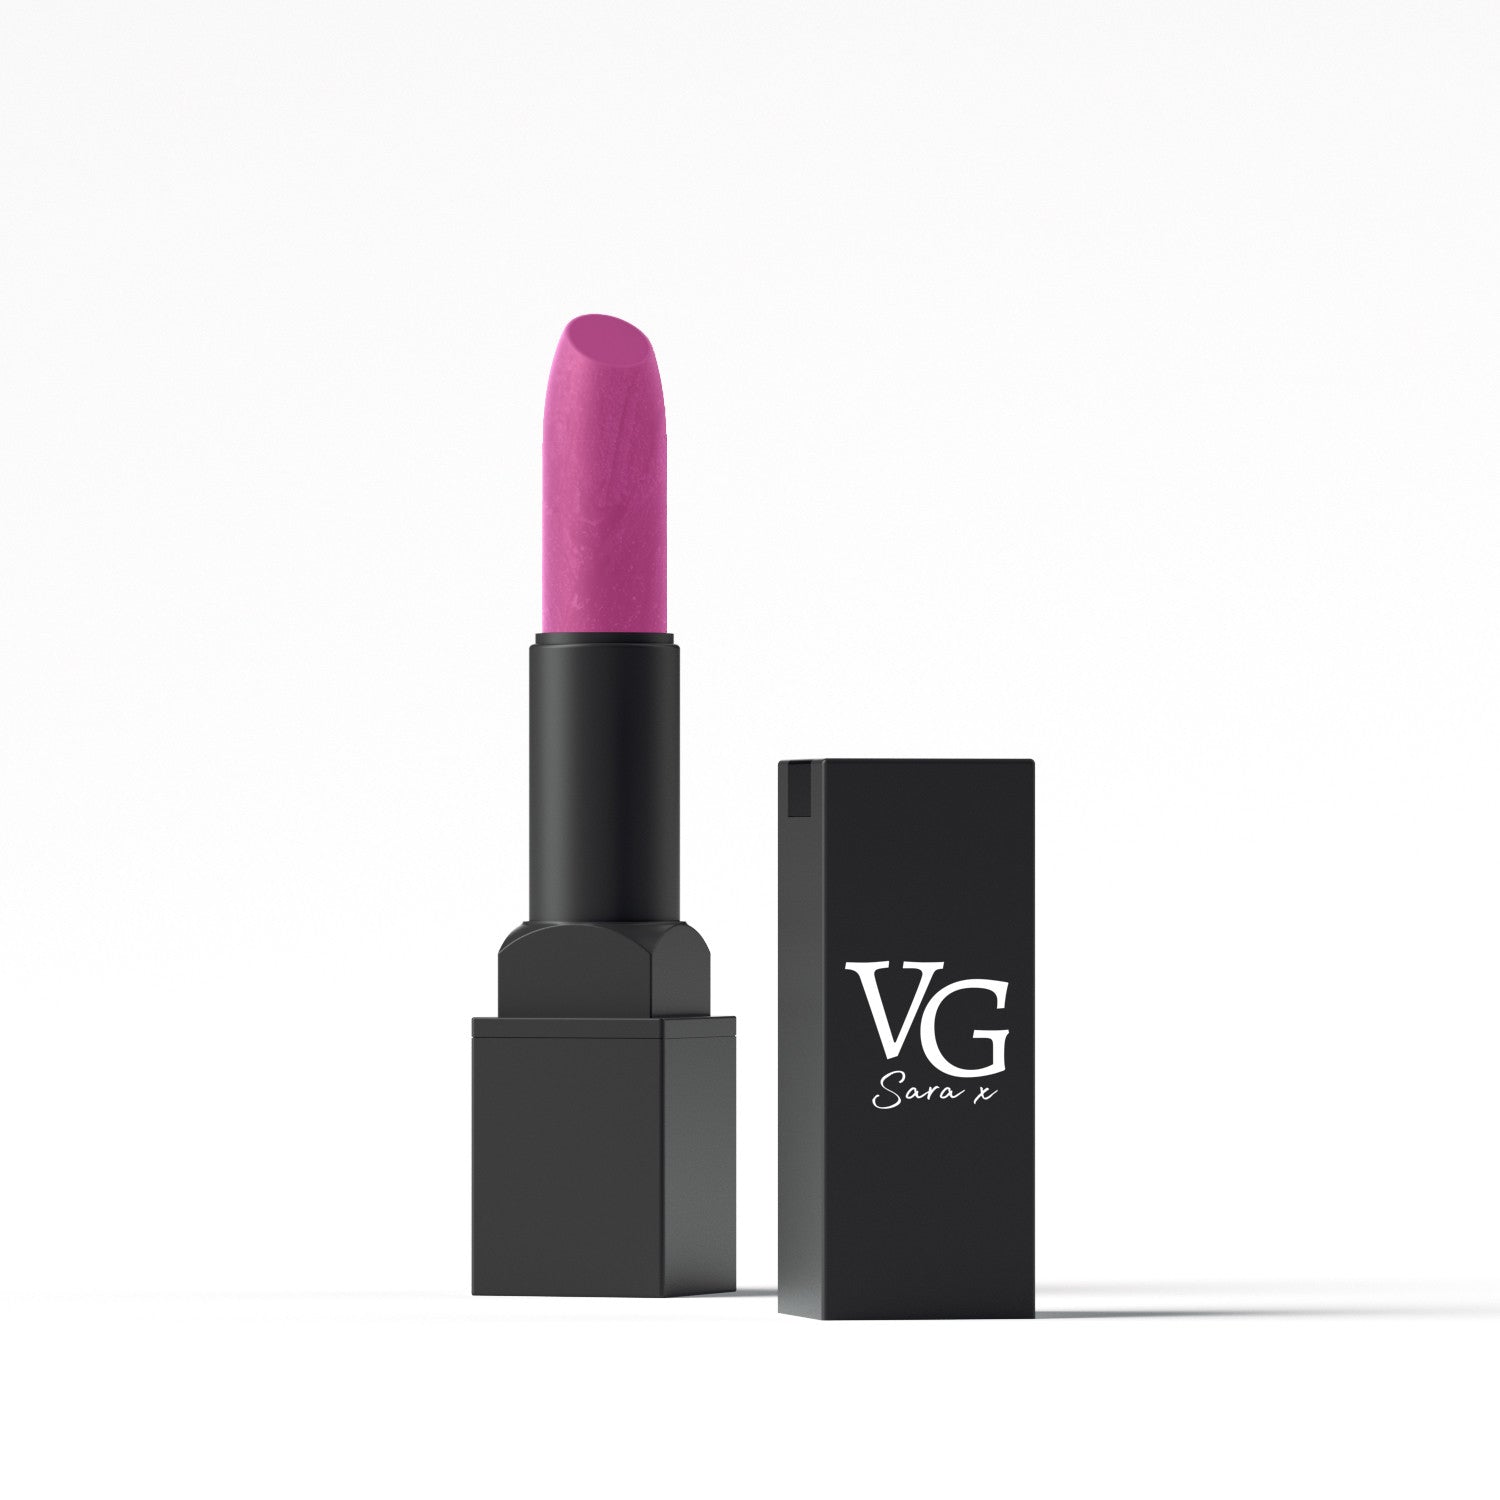 purple shade VG lipstick with black tube showcasing the product